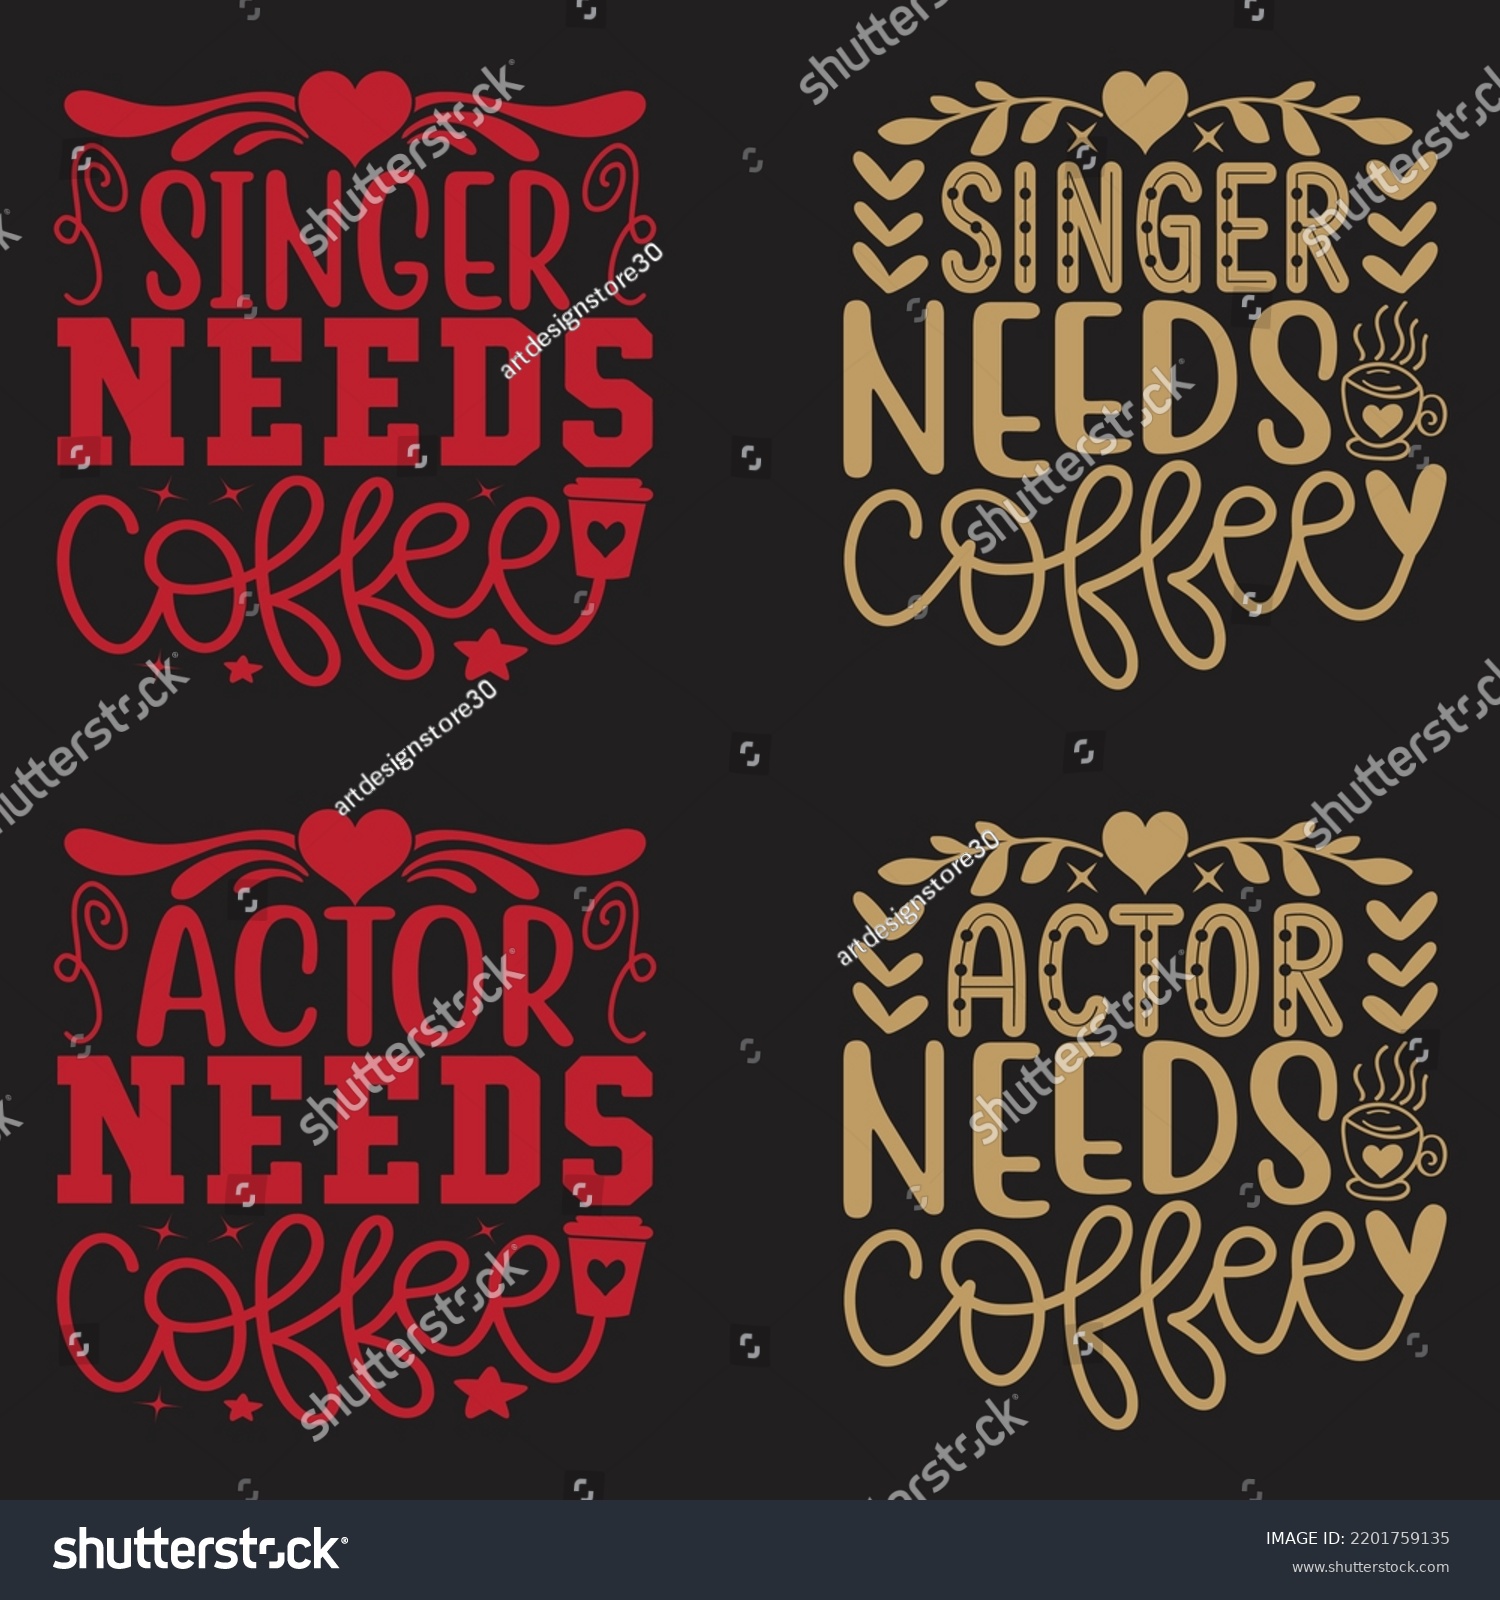 SVG of Coffee Caffeine Quotes SVG And Tshirt Design Bundle. Family Coffee Quotes SVG And Tshirt Design Bundle. Coffee Vector EPS Editable Files Bundle, can you download this bundle. svg